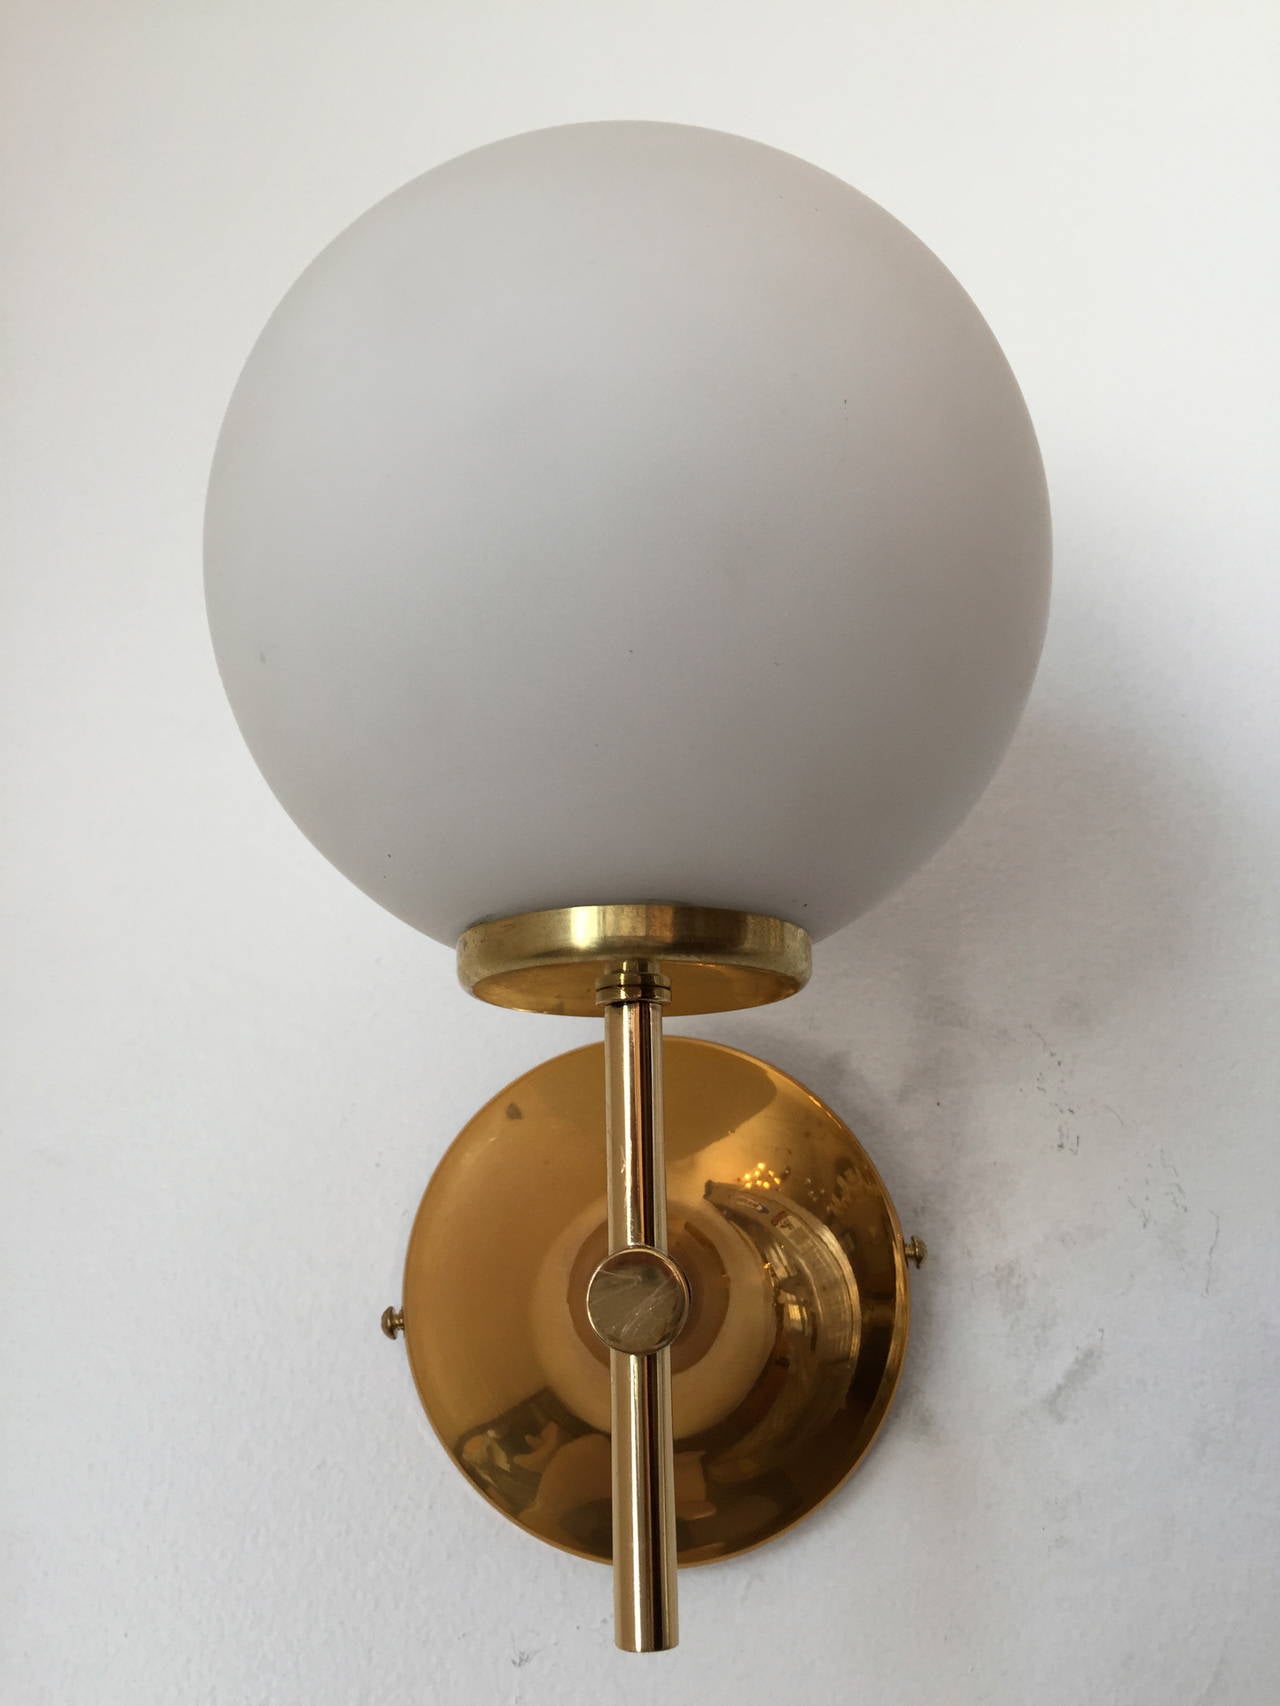 A nice set of Space-Age sconces composed of polished brass golden fixtures with white frosted glass globe shades. Rewired.